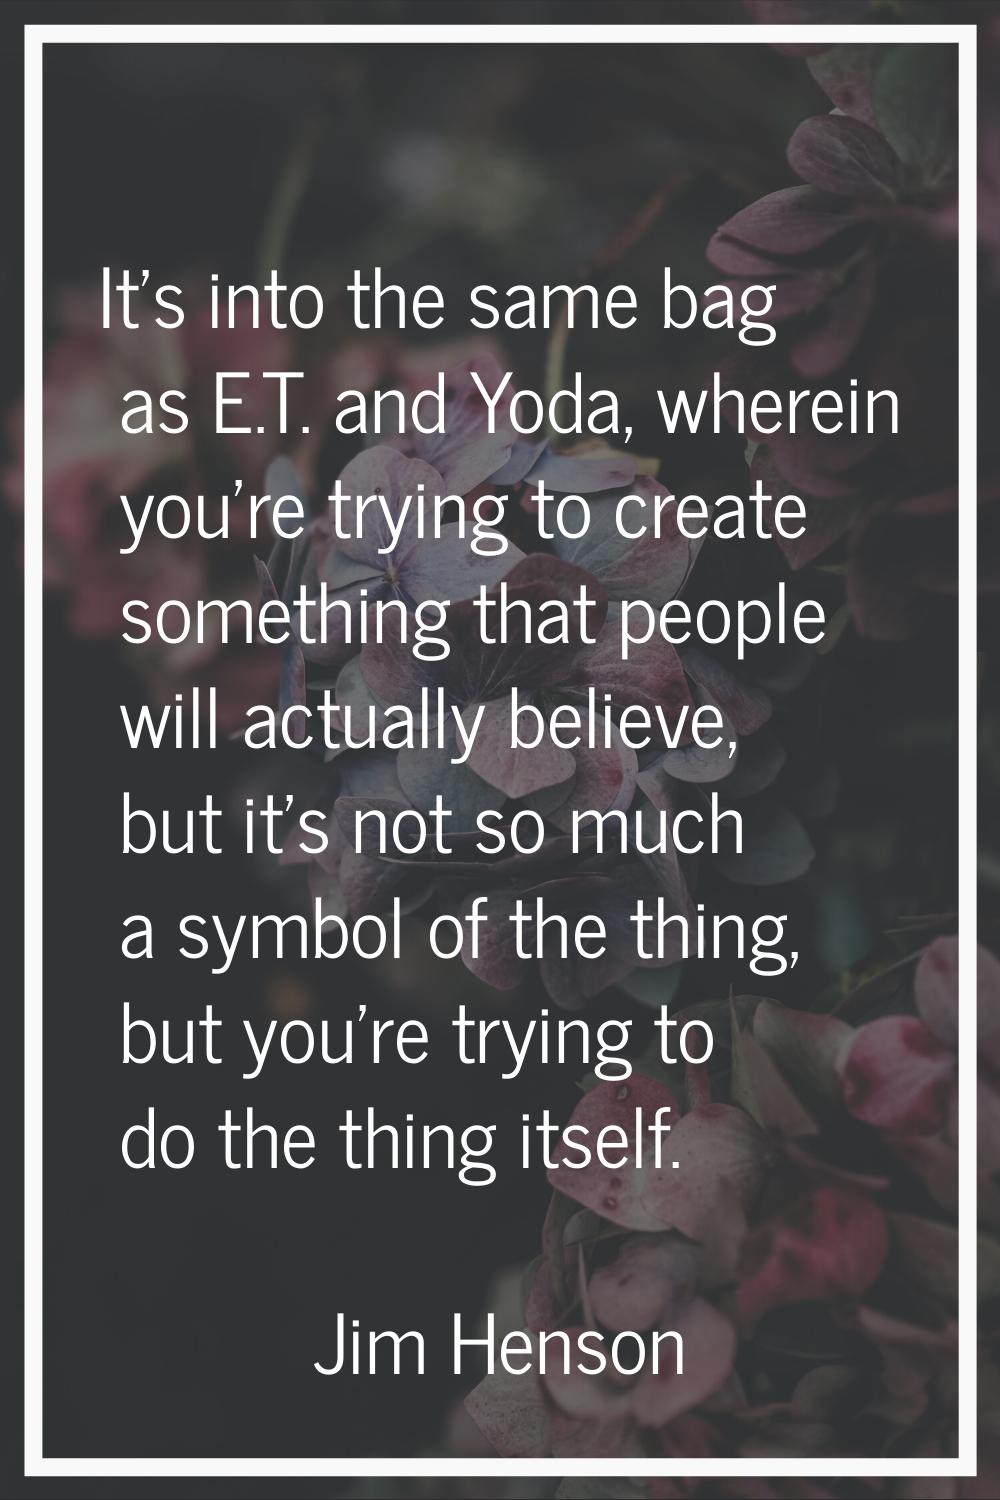 It's into the same bag as E.T. and Yoda, wherein you're trying to create something that people will